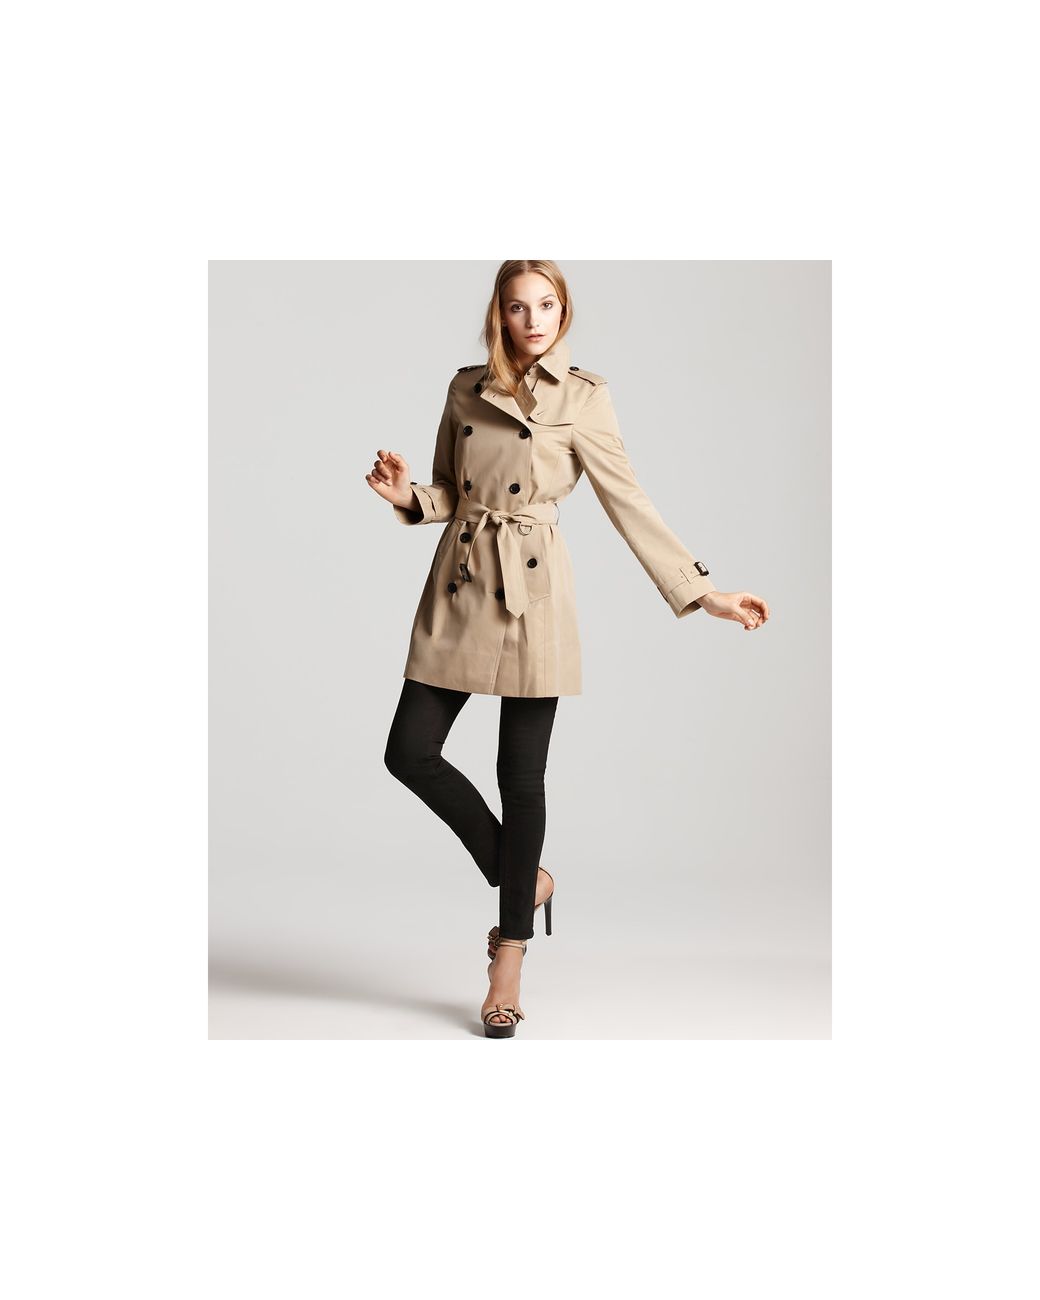 Burberry London Buckingham Trench Coat in Natural | Lyst